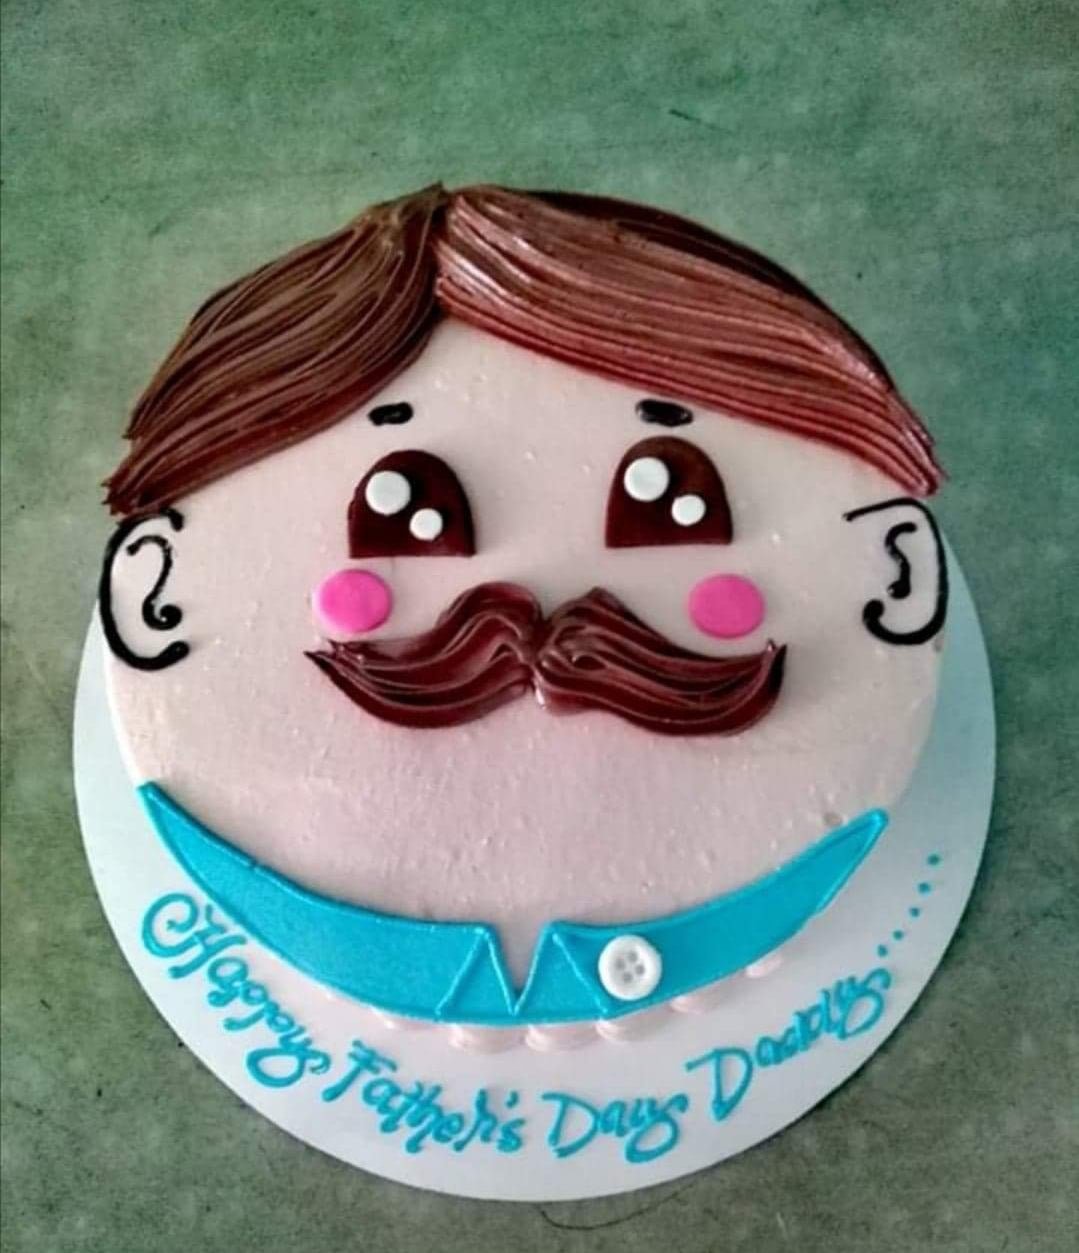 BIRTHDAY CAKE FOR FATHER - Design 2